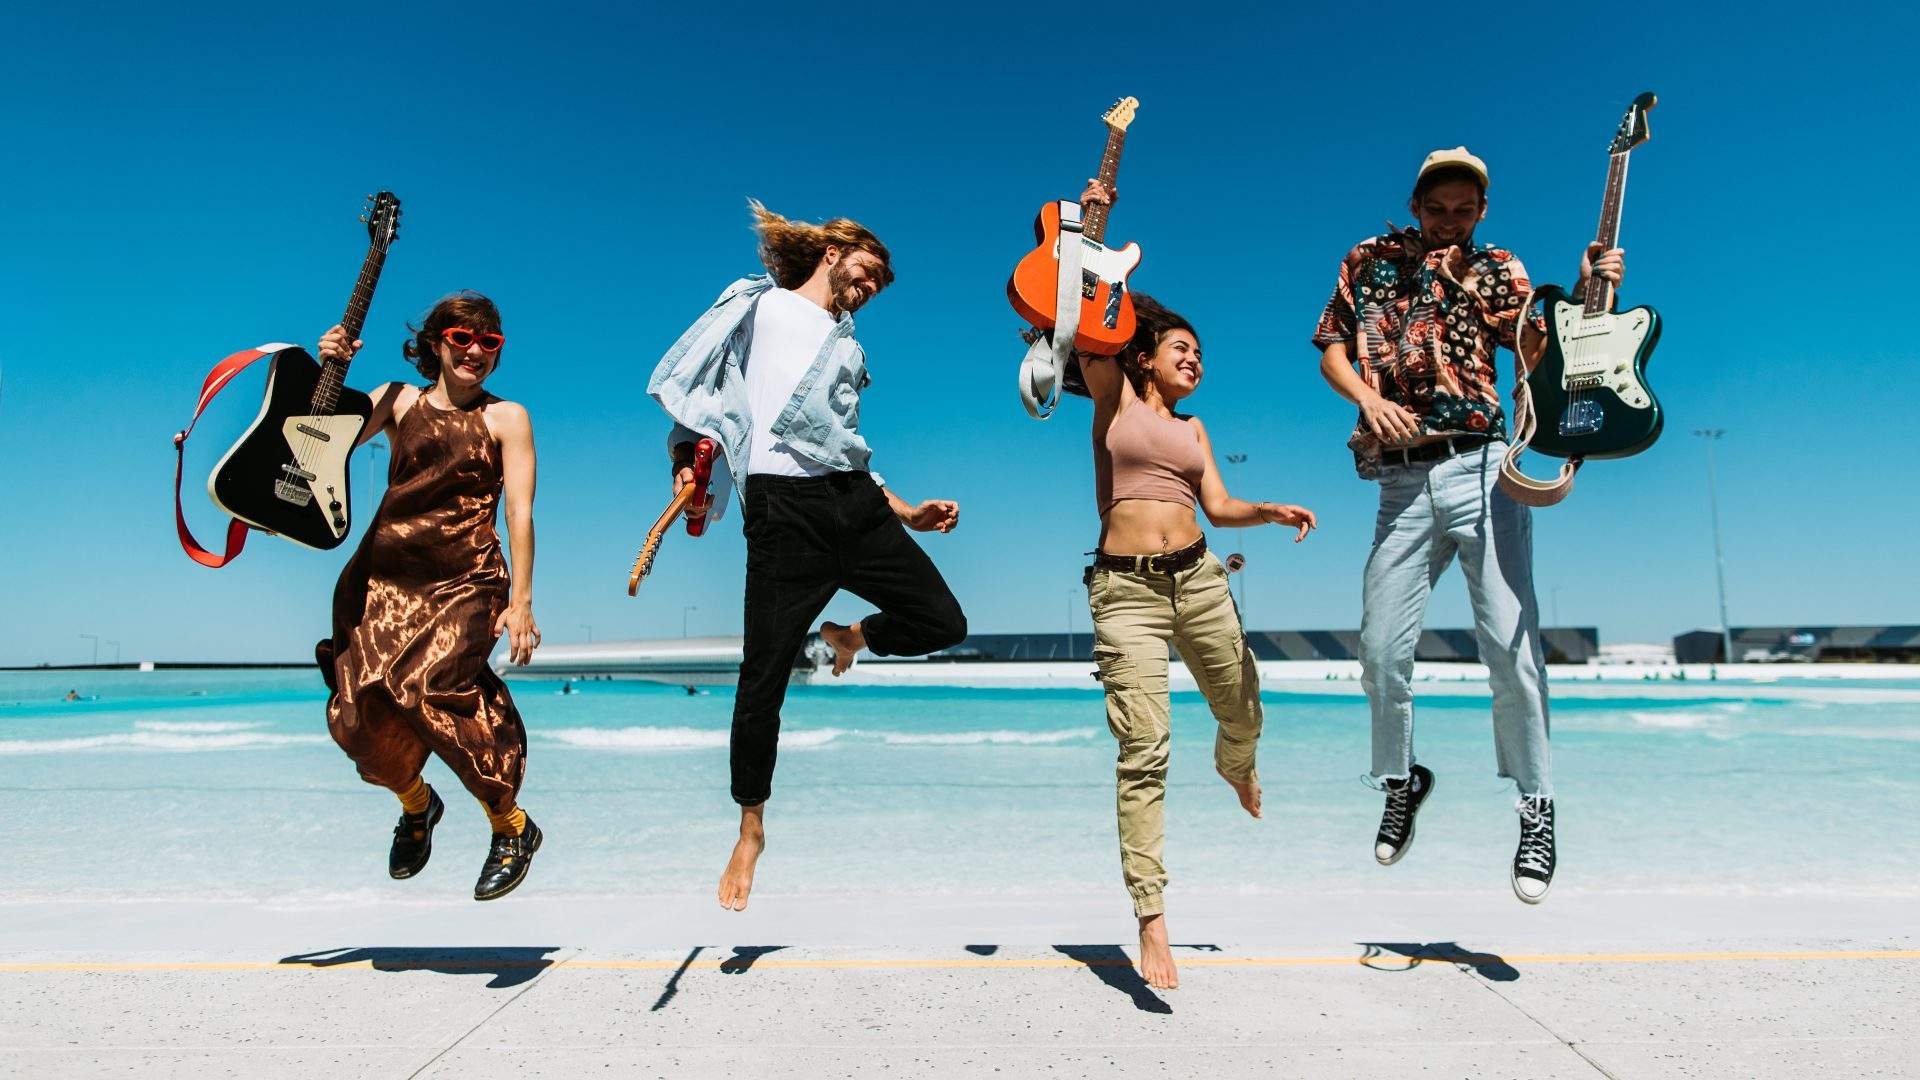 Four musicians jumping in front of a surf park